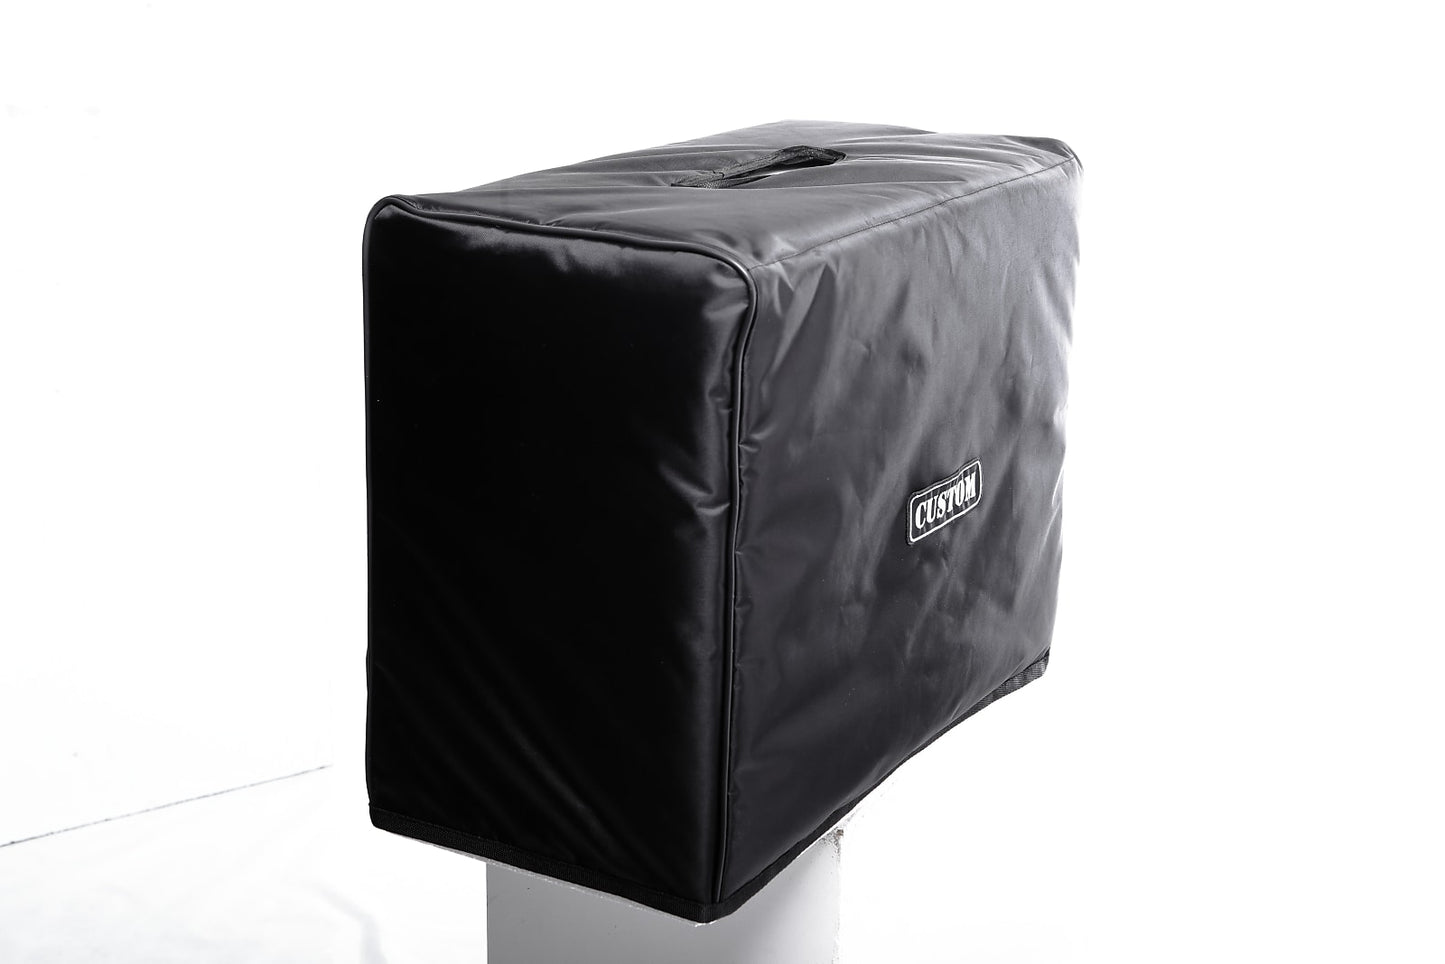 Custom padded cover for Mesa Boogie Lonestar Special 2x12 combo amp